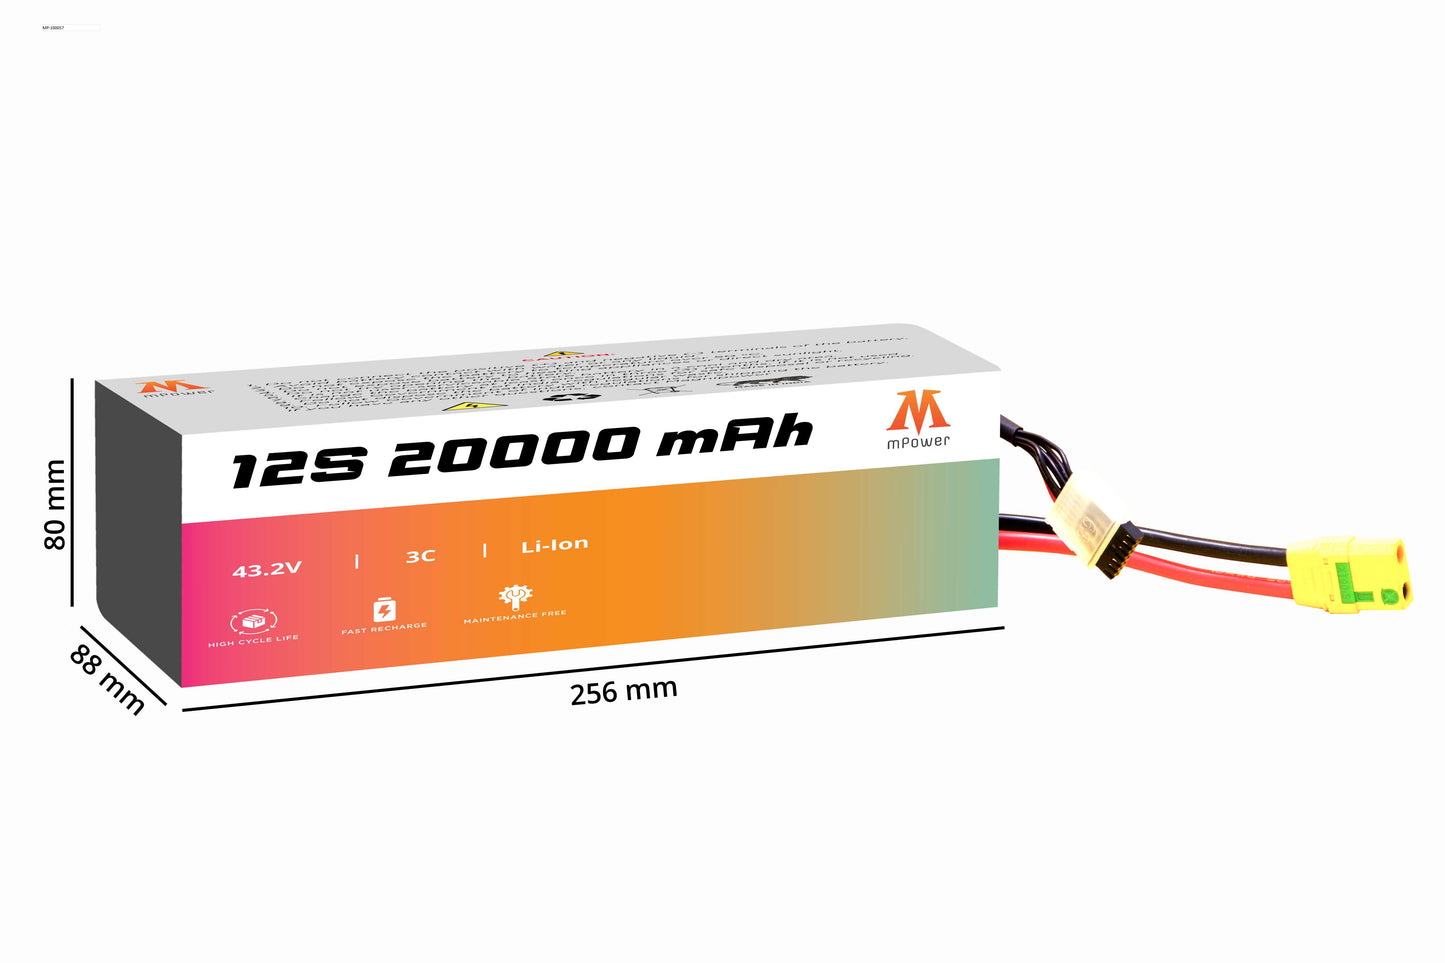 mPower 12S 20000mAh Lithium-Ion Battery for Survey Drones